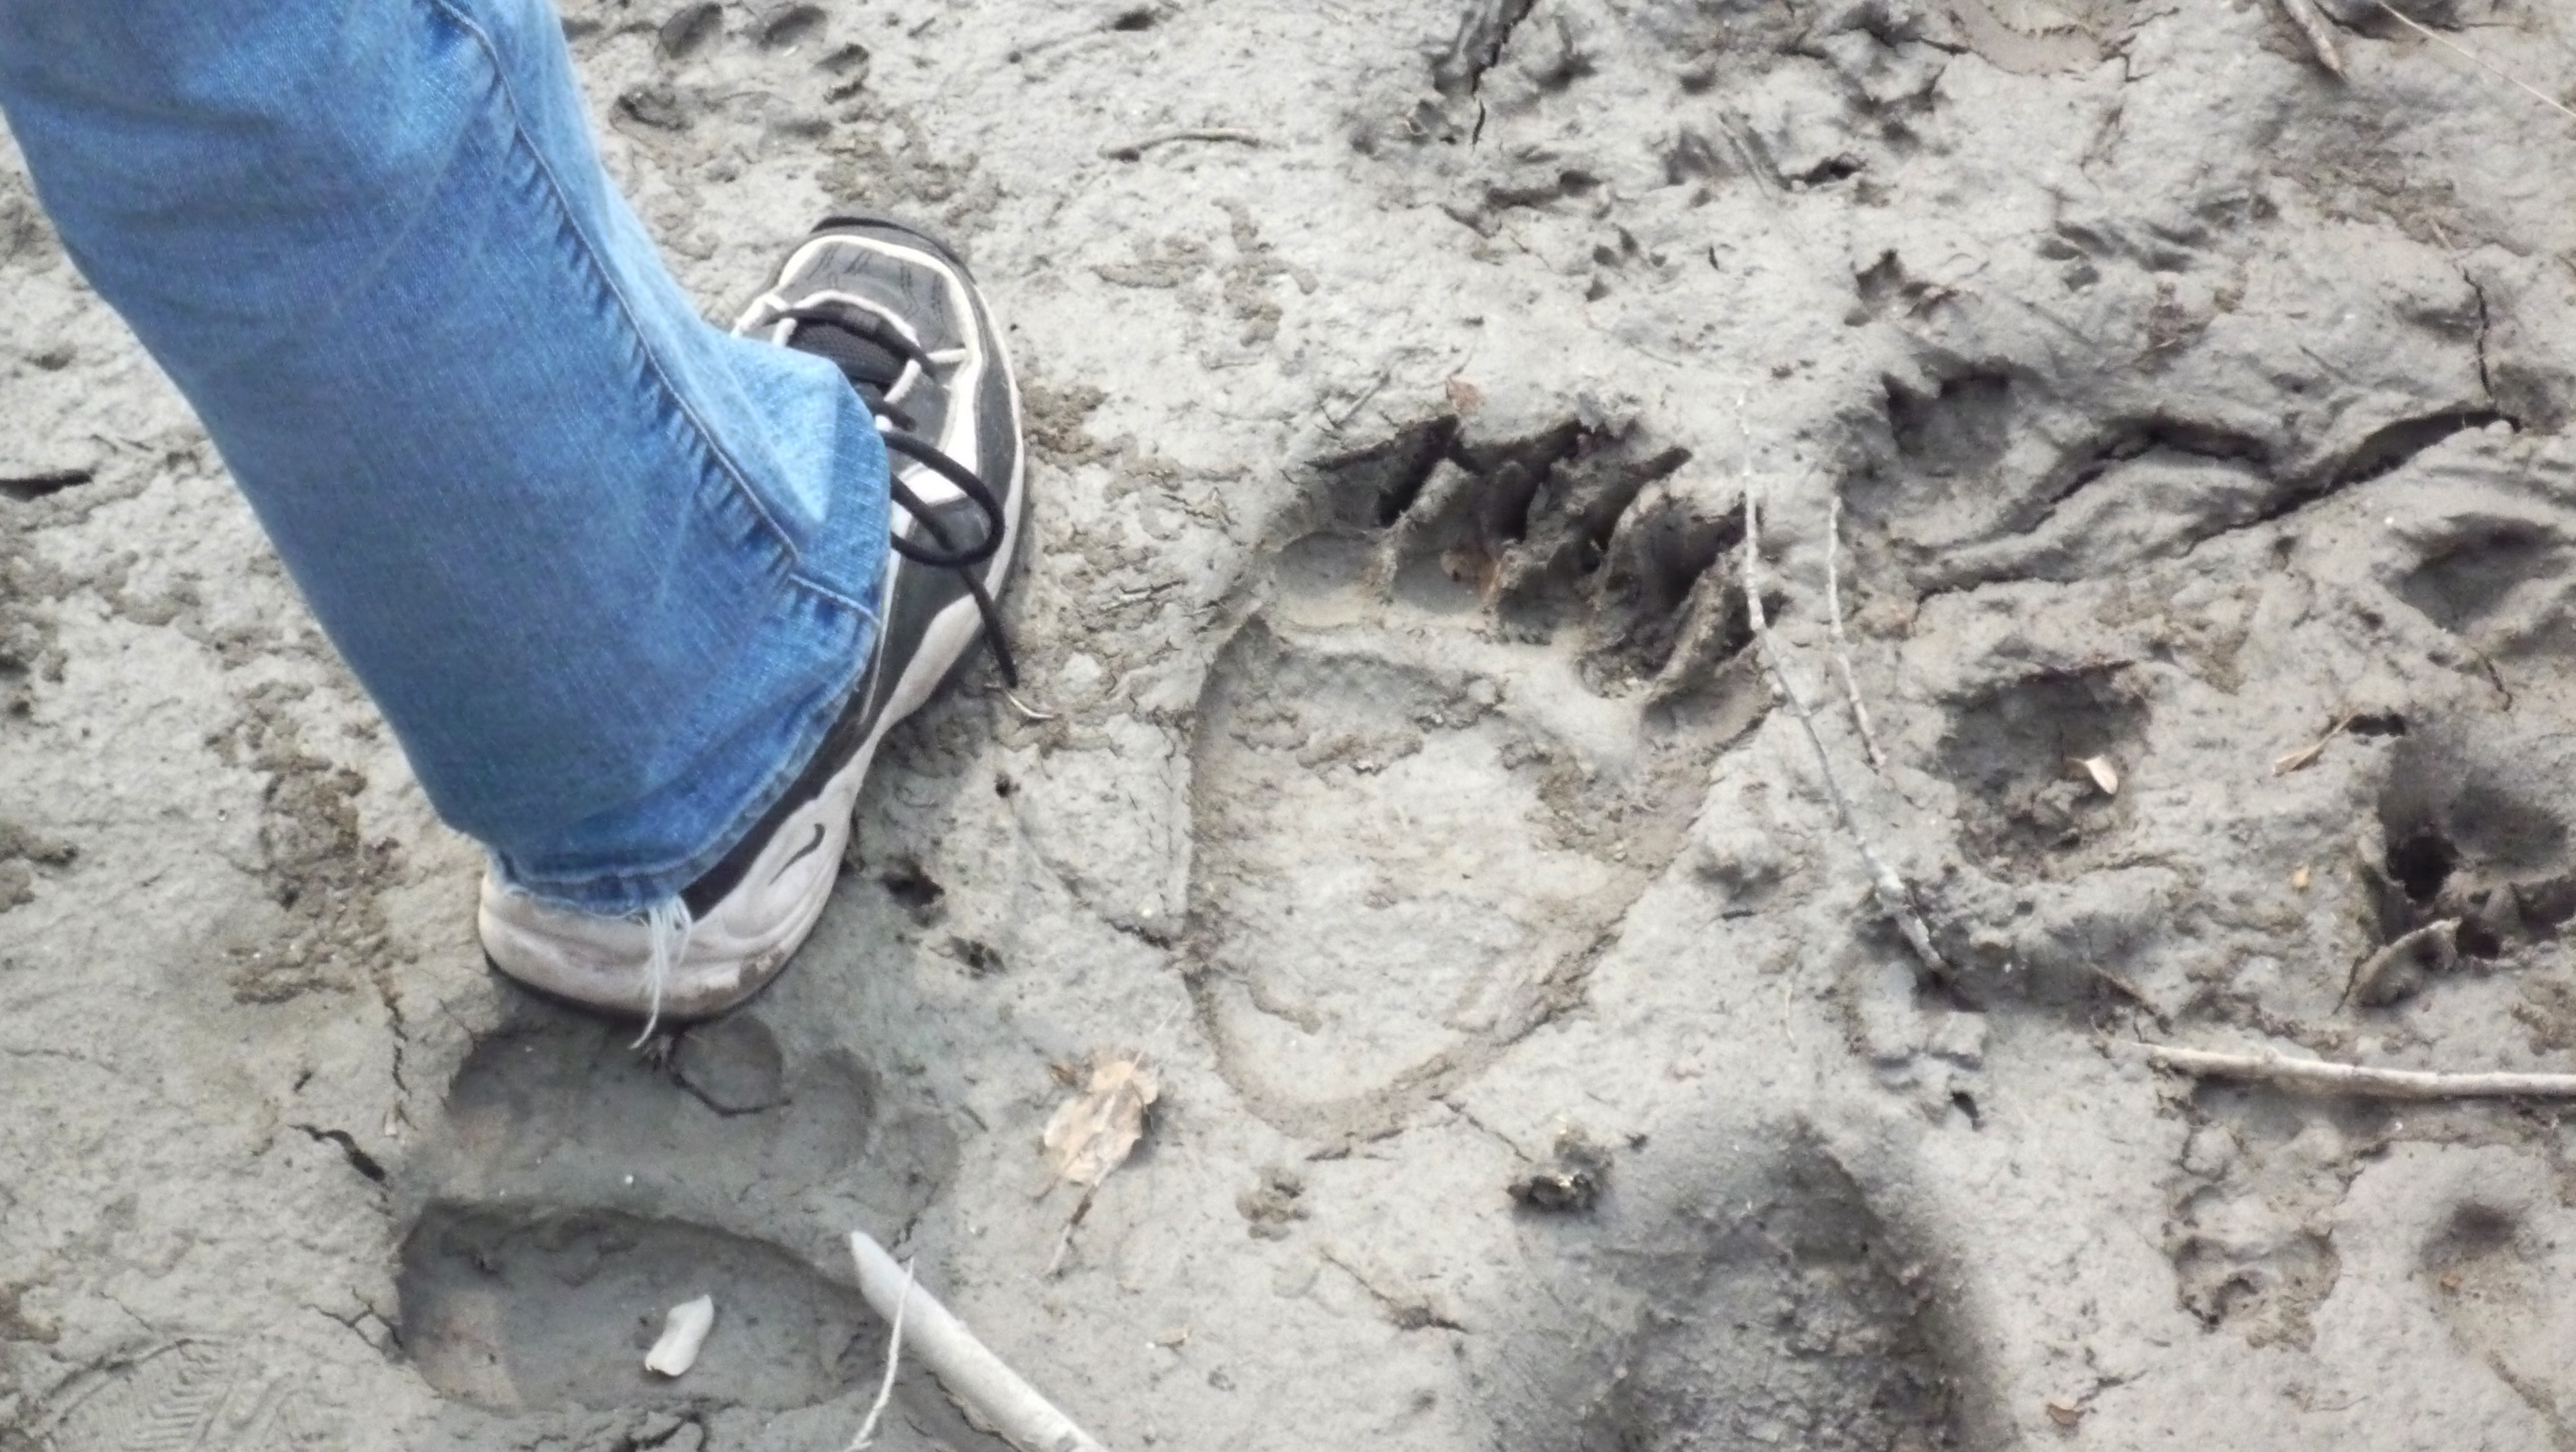 Leanne's foot next to a grizzly track found on the ranch